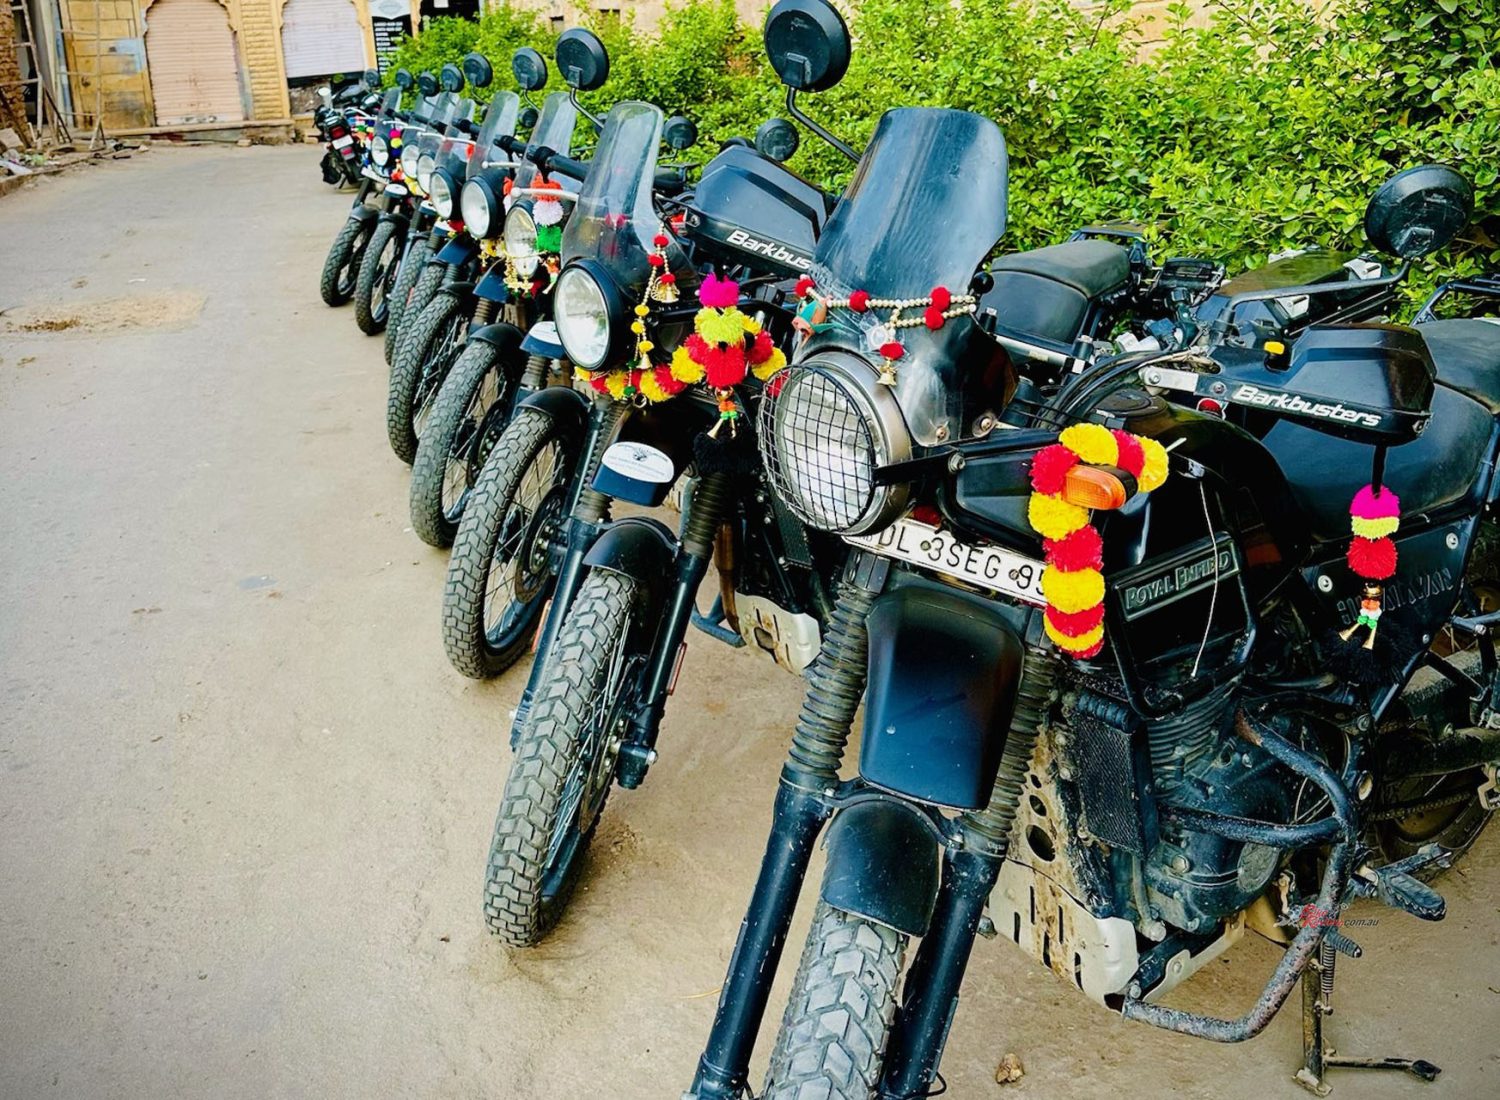 Royal Enfield may have 2000+ retail locations across India, but it appears they have recognised that renting bikes and selling them are two very different processes.